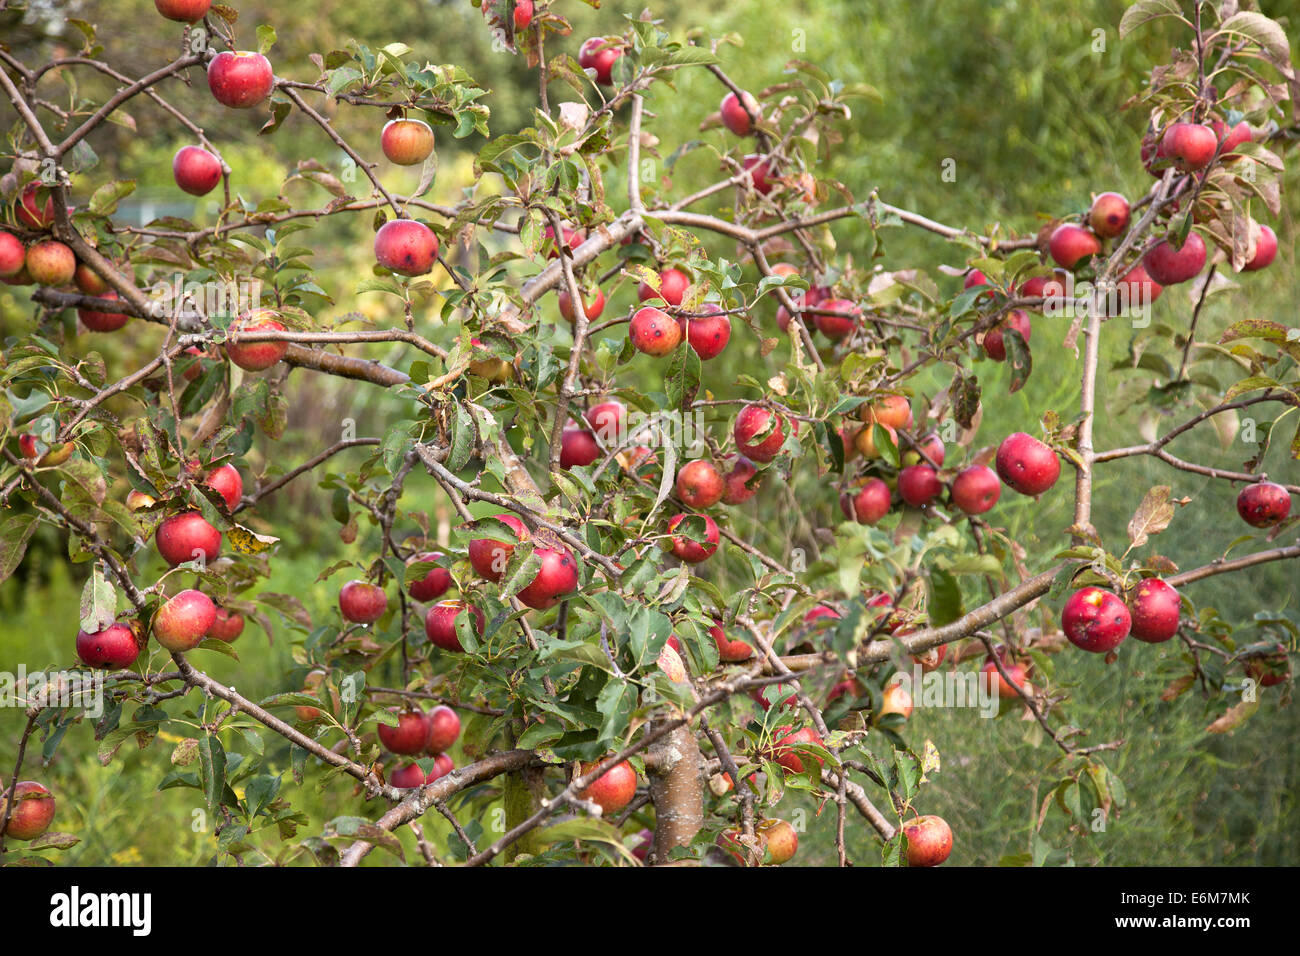 small apple tree with a lot of ripe red apples Stock Photo